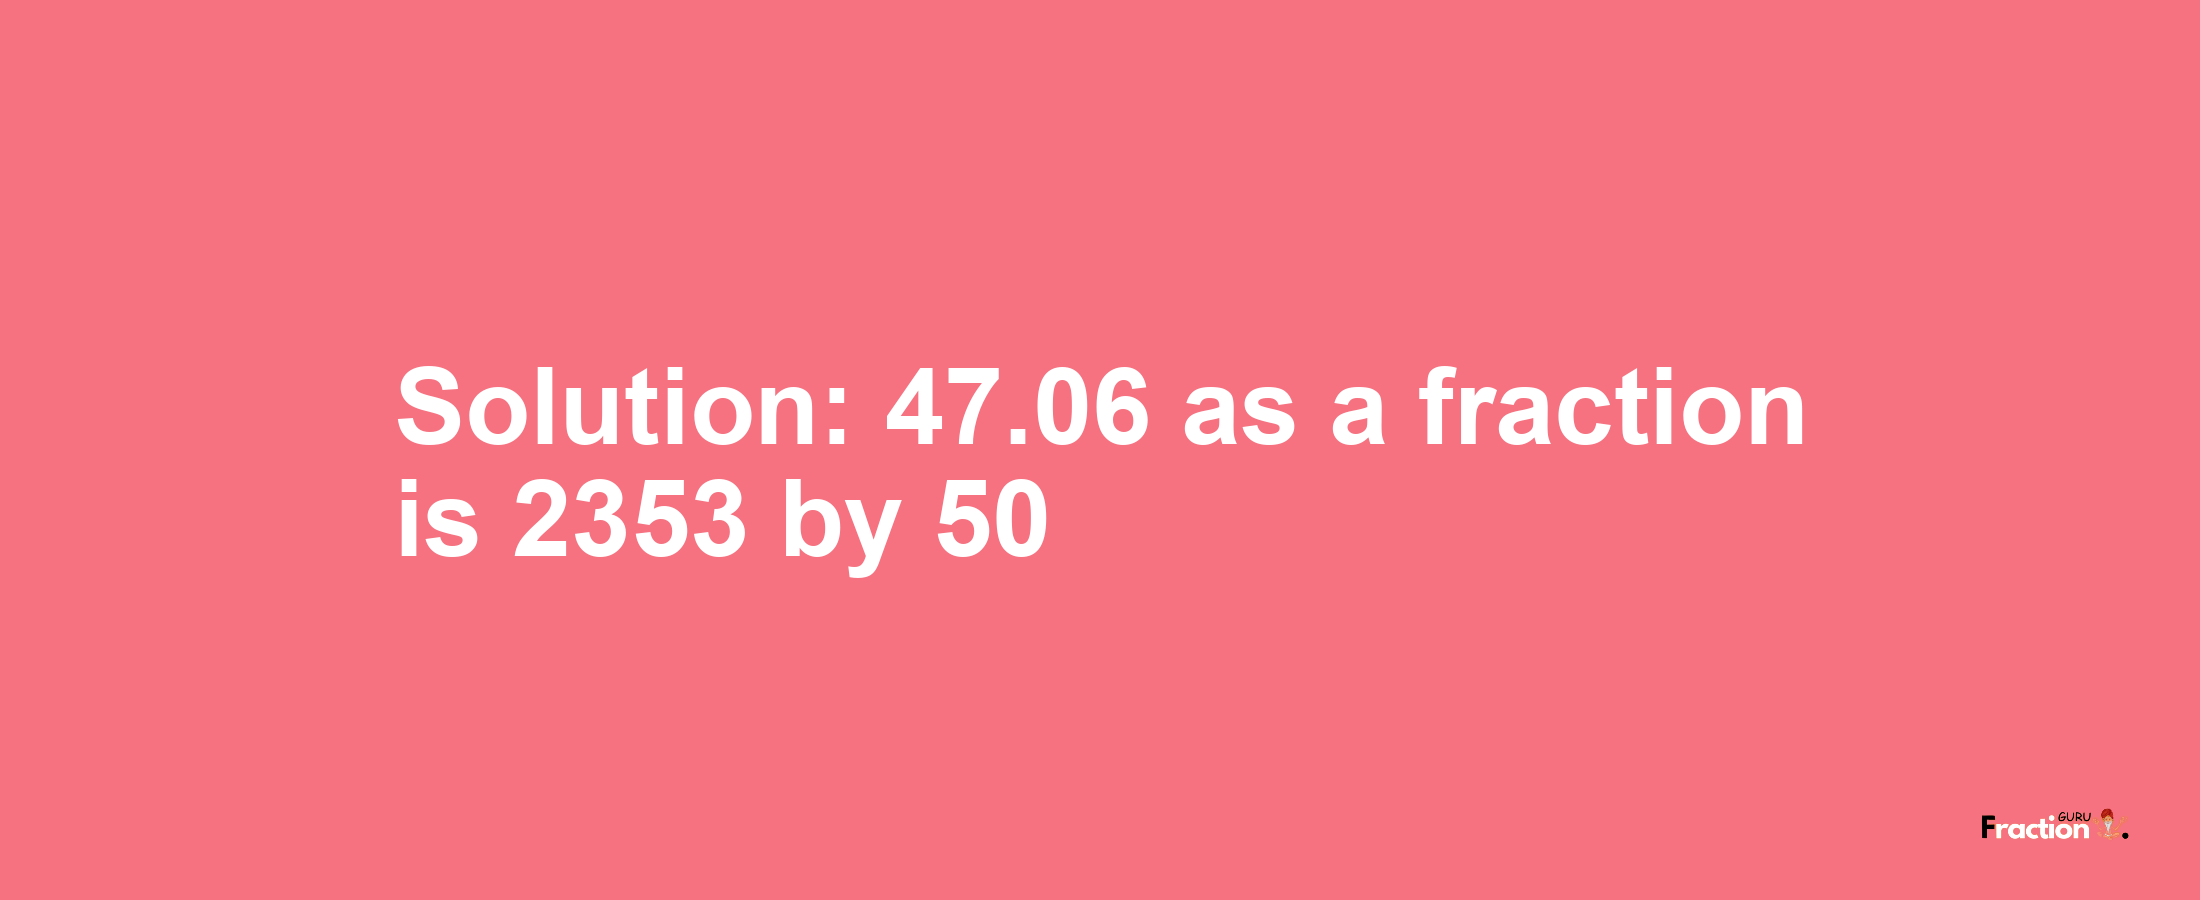 Solution:47.06 as a fraction is 2353/50